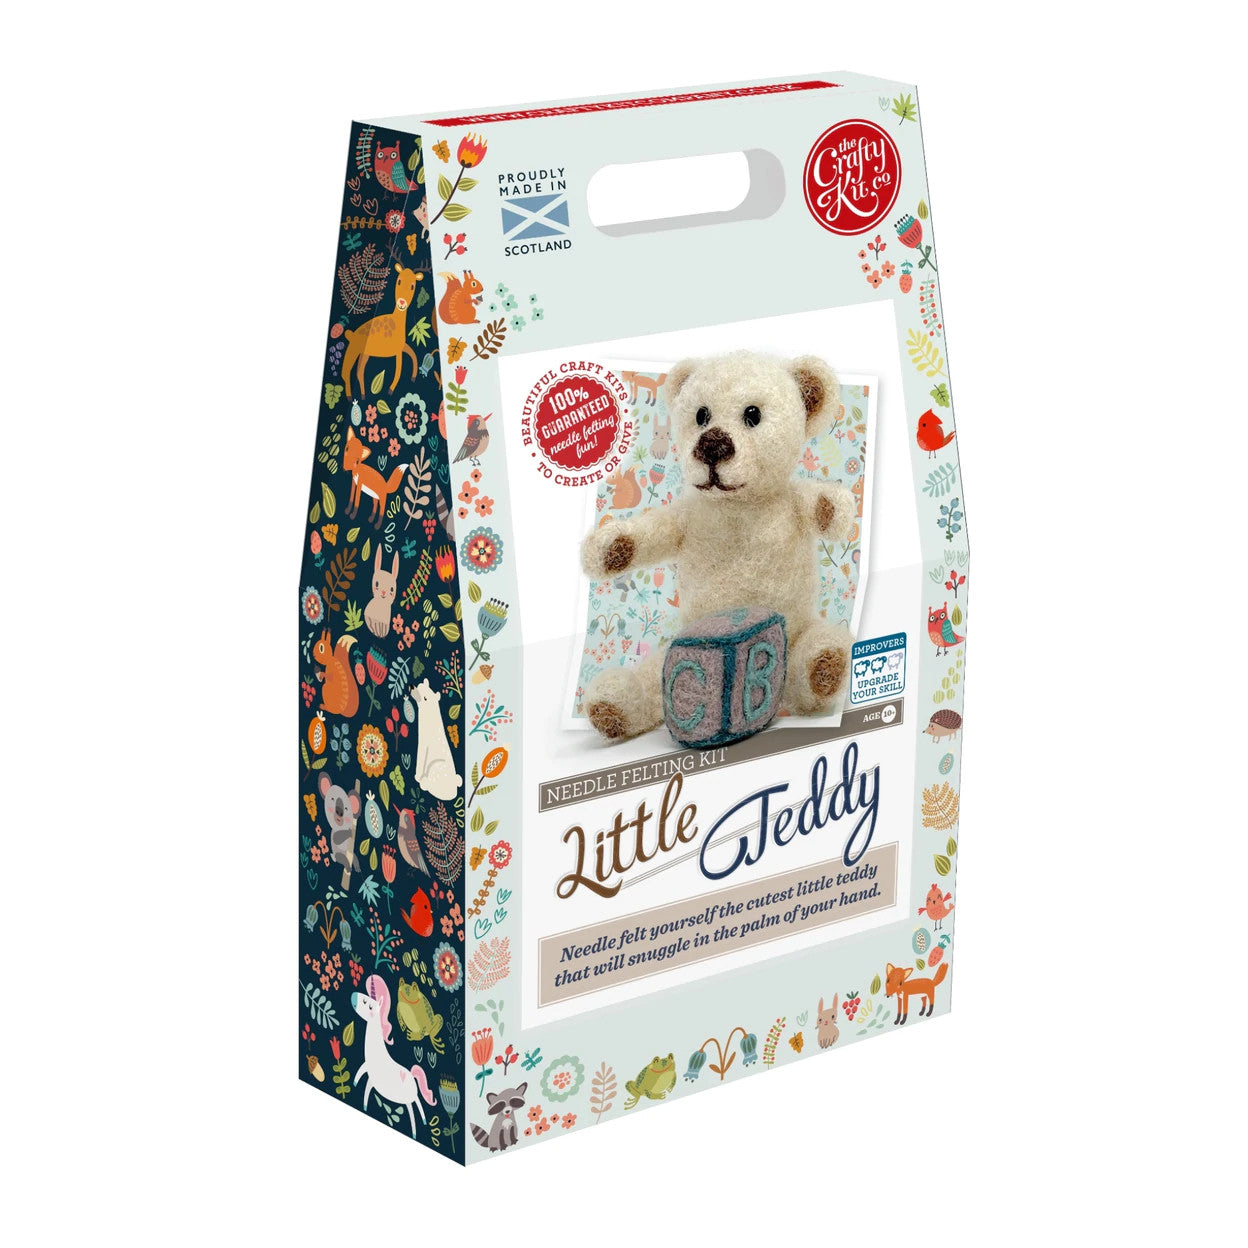 Little Teddy Needle Felting Kit from The Crafty Kit Co. Made in Scotland